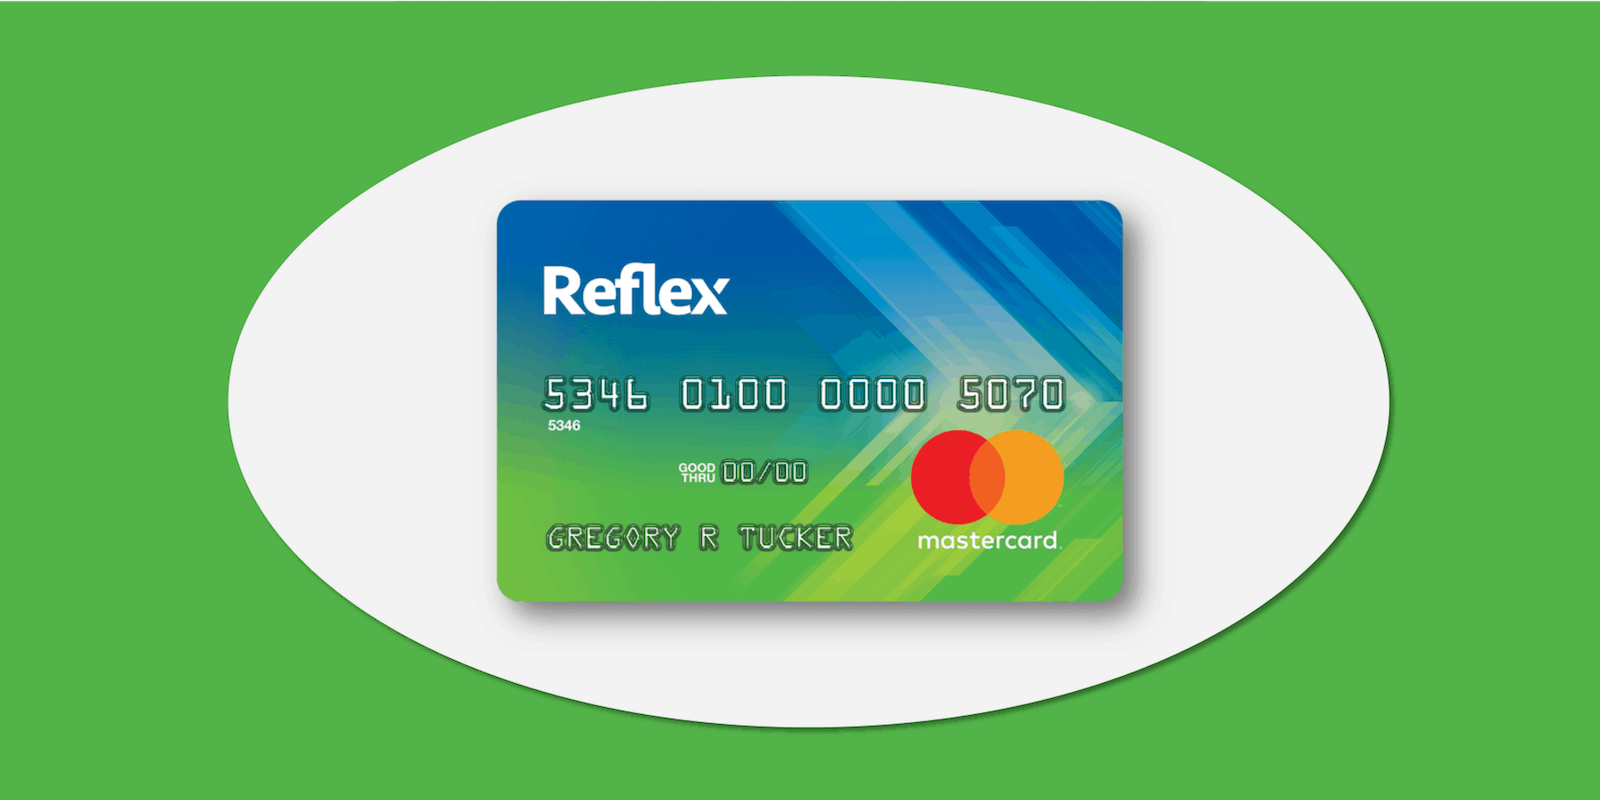 Reflex Credit Card Review: Reasons to Avoid It - Just Start Investing